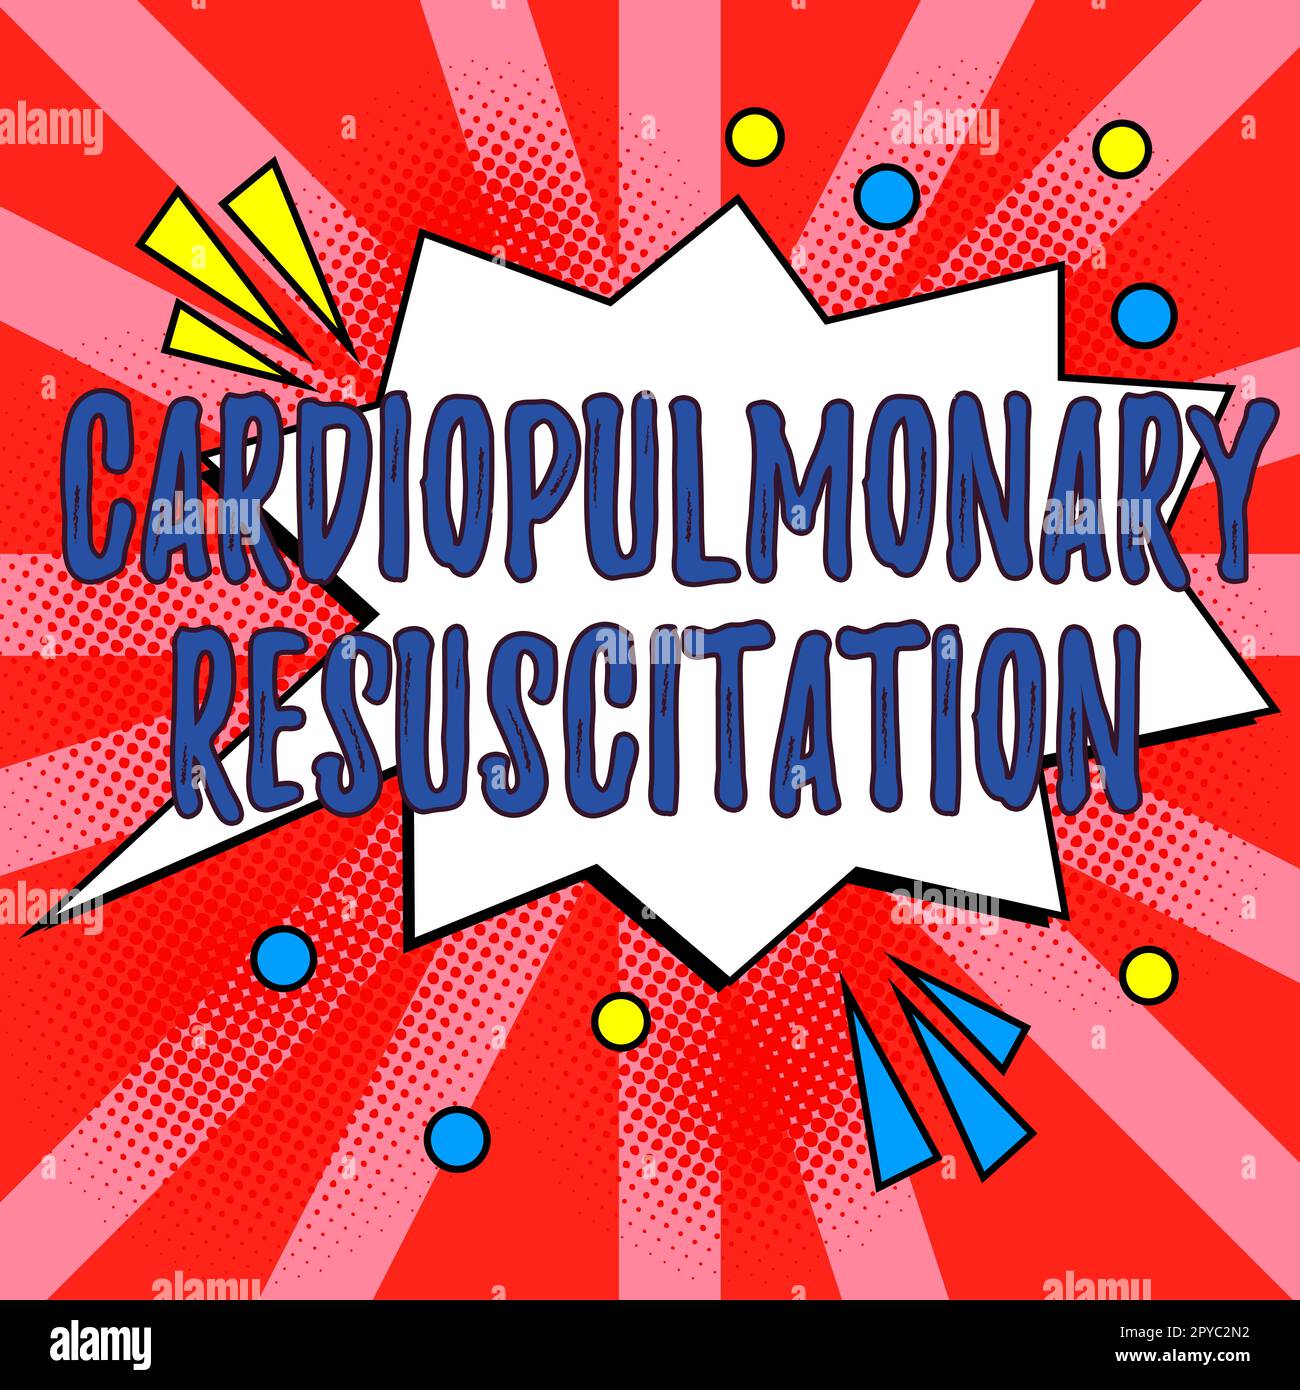 Text showing inspiration Cardiopulmonary Resuscitation. Word for repeated cycles compression chest respiration Stock Photo